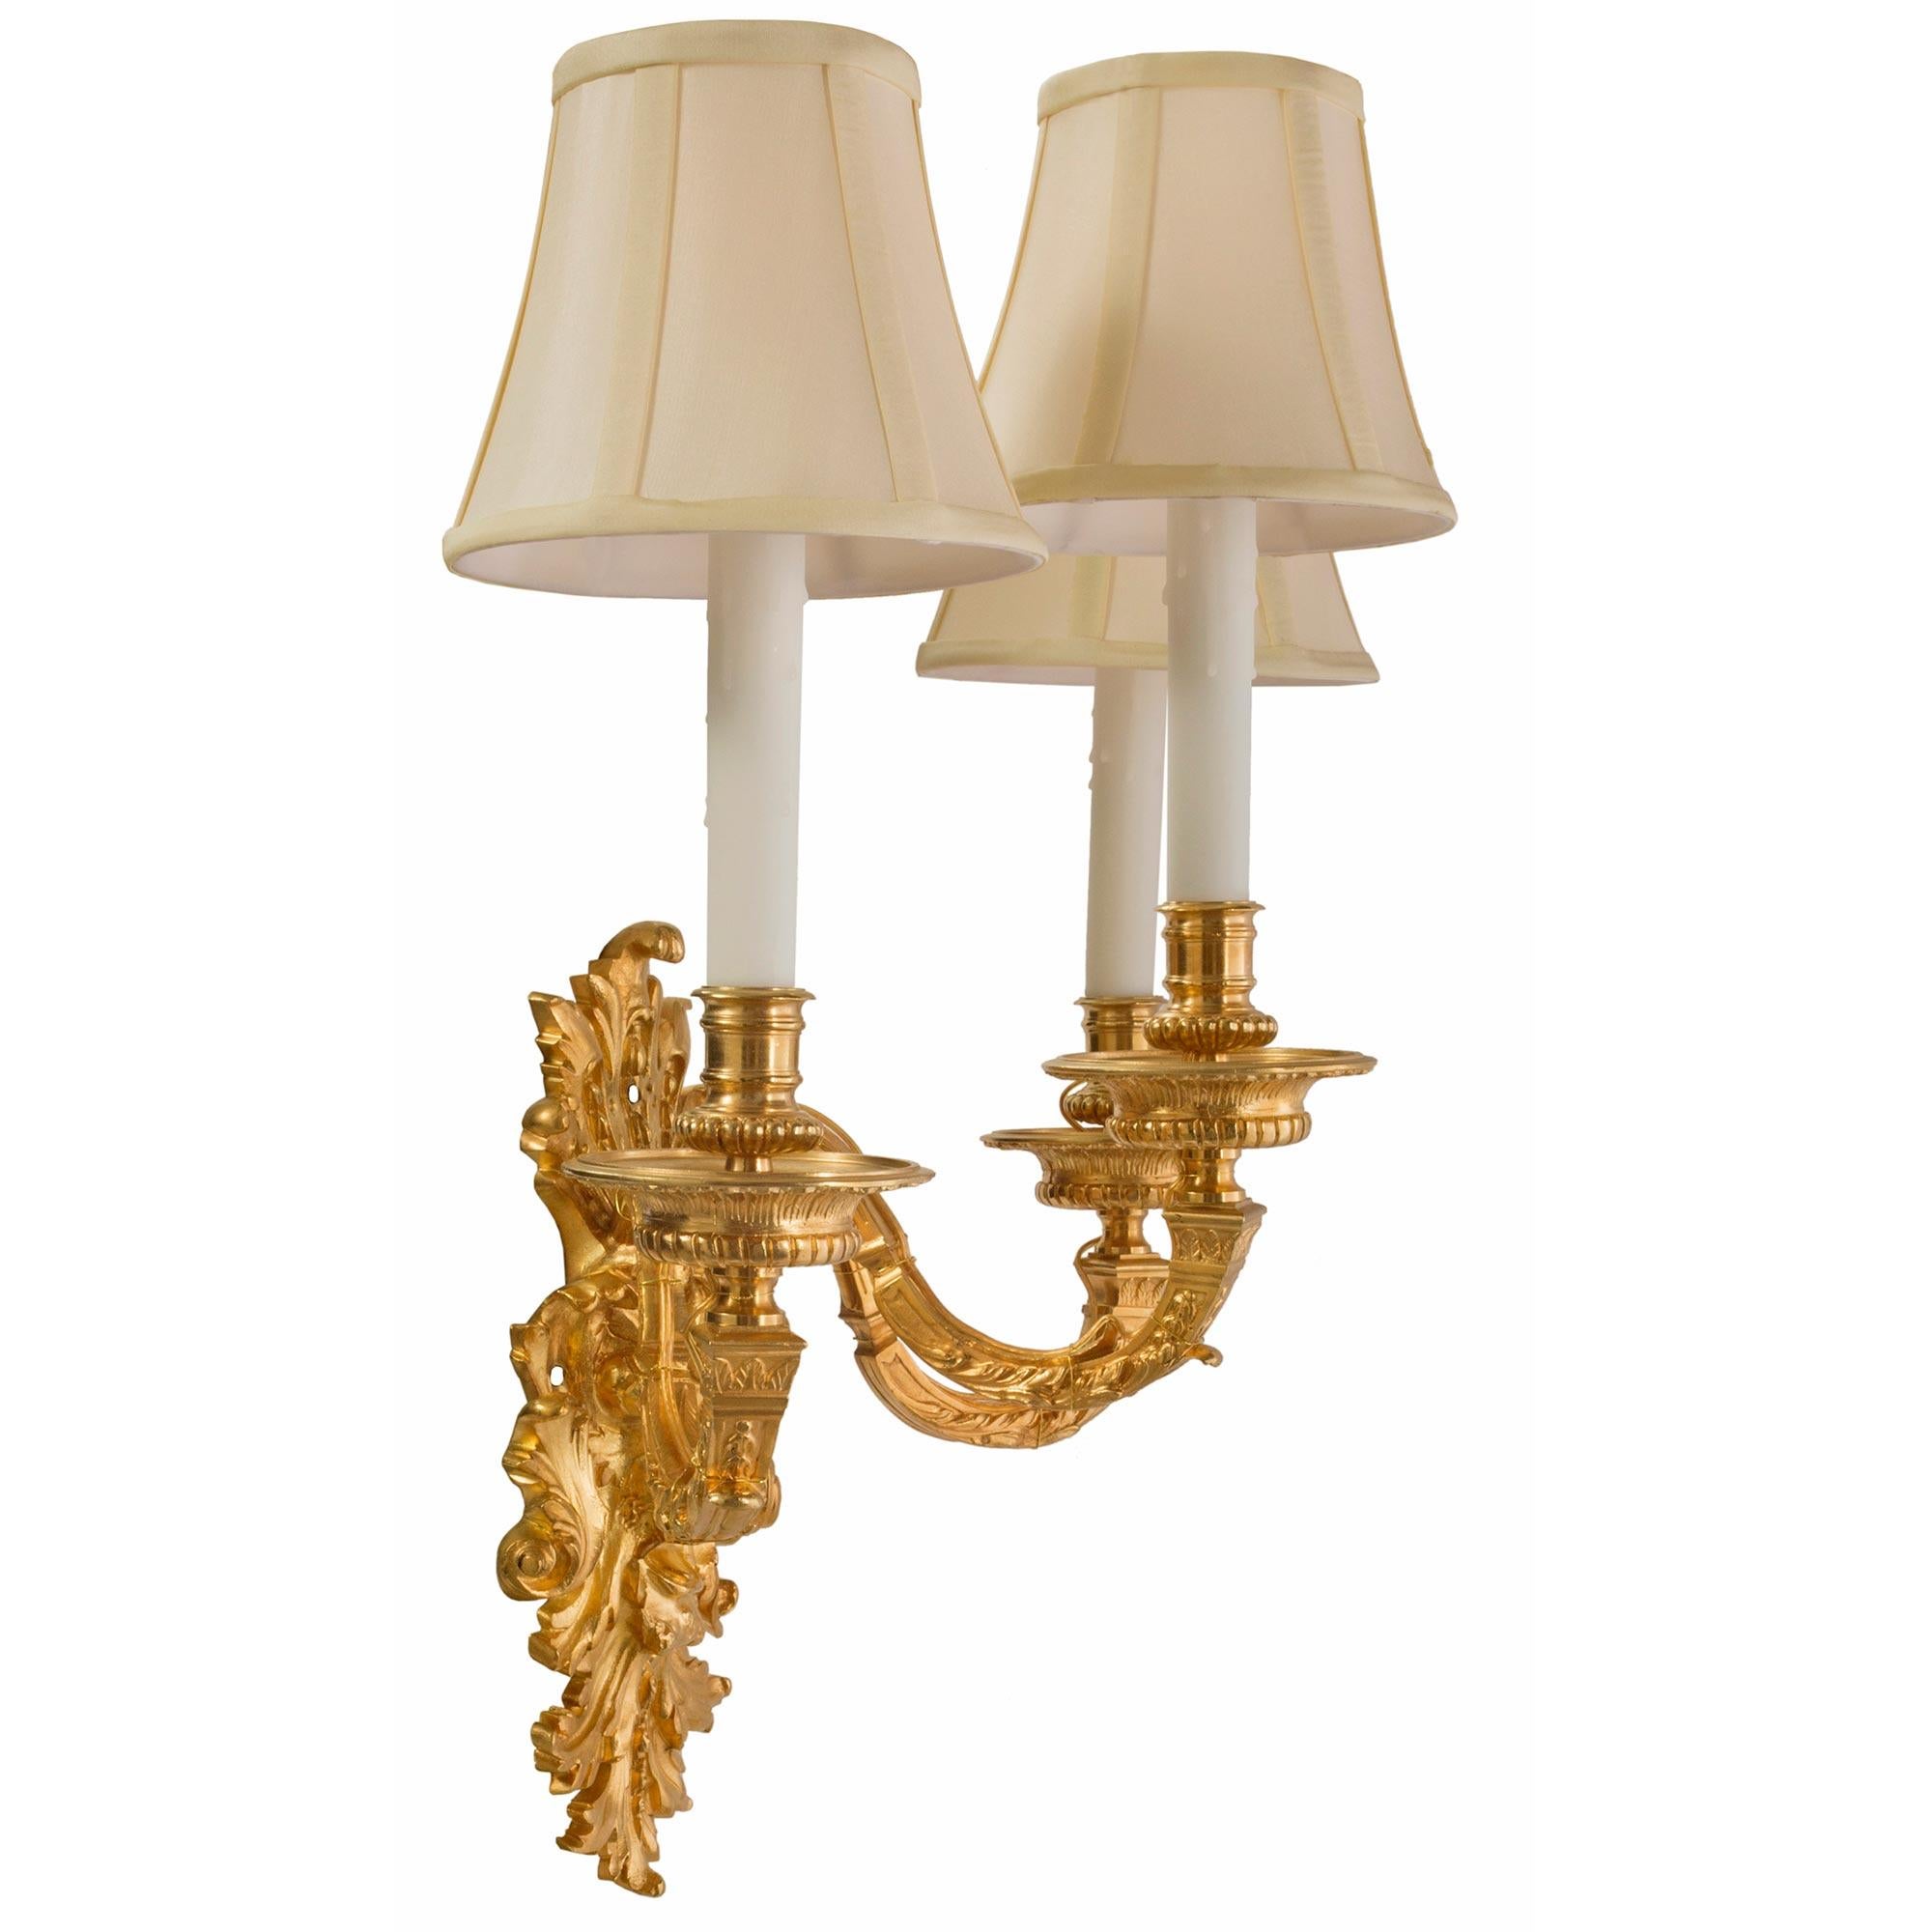 Pair of French Mid-19th Century Louis XIV St. Ormolu Three-Arm Sconces In Good Condition For Sale In West Palm Beach, FL